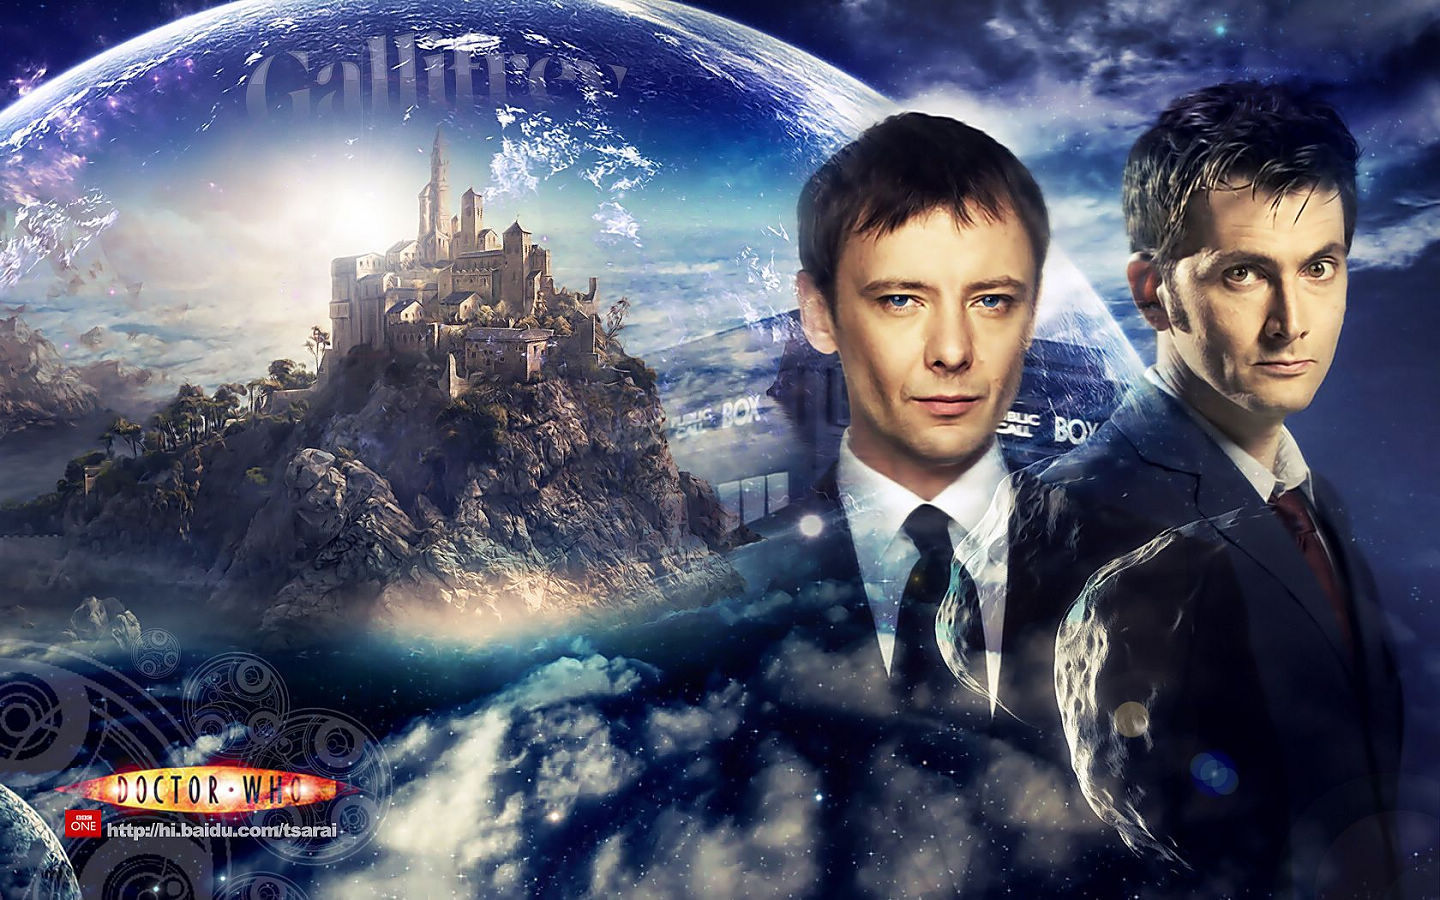 Doctor Who-doctor And Master - Doctor Who David Tennant Background - HD Wallpaper 